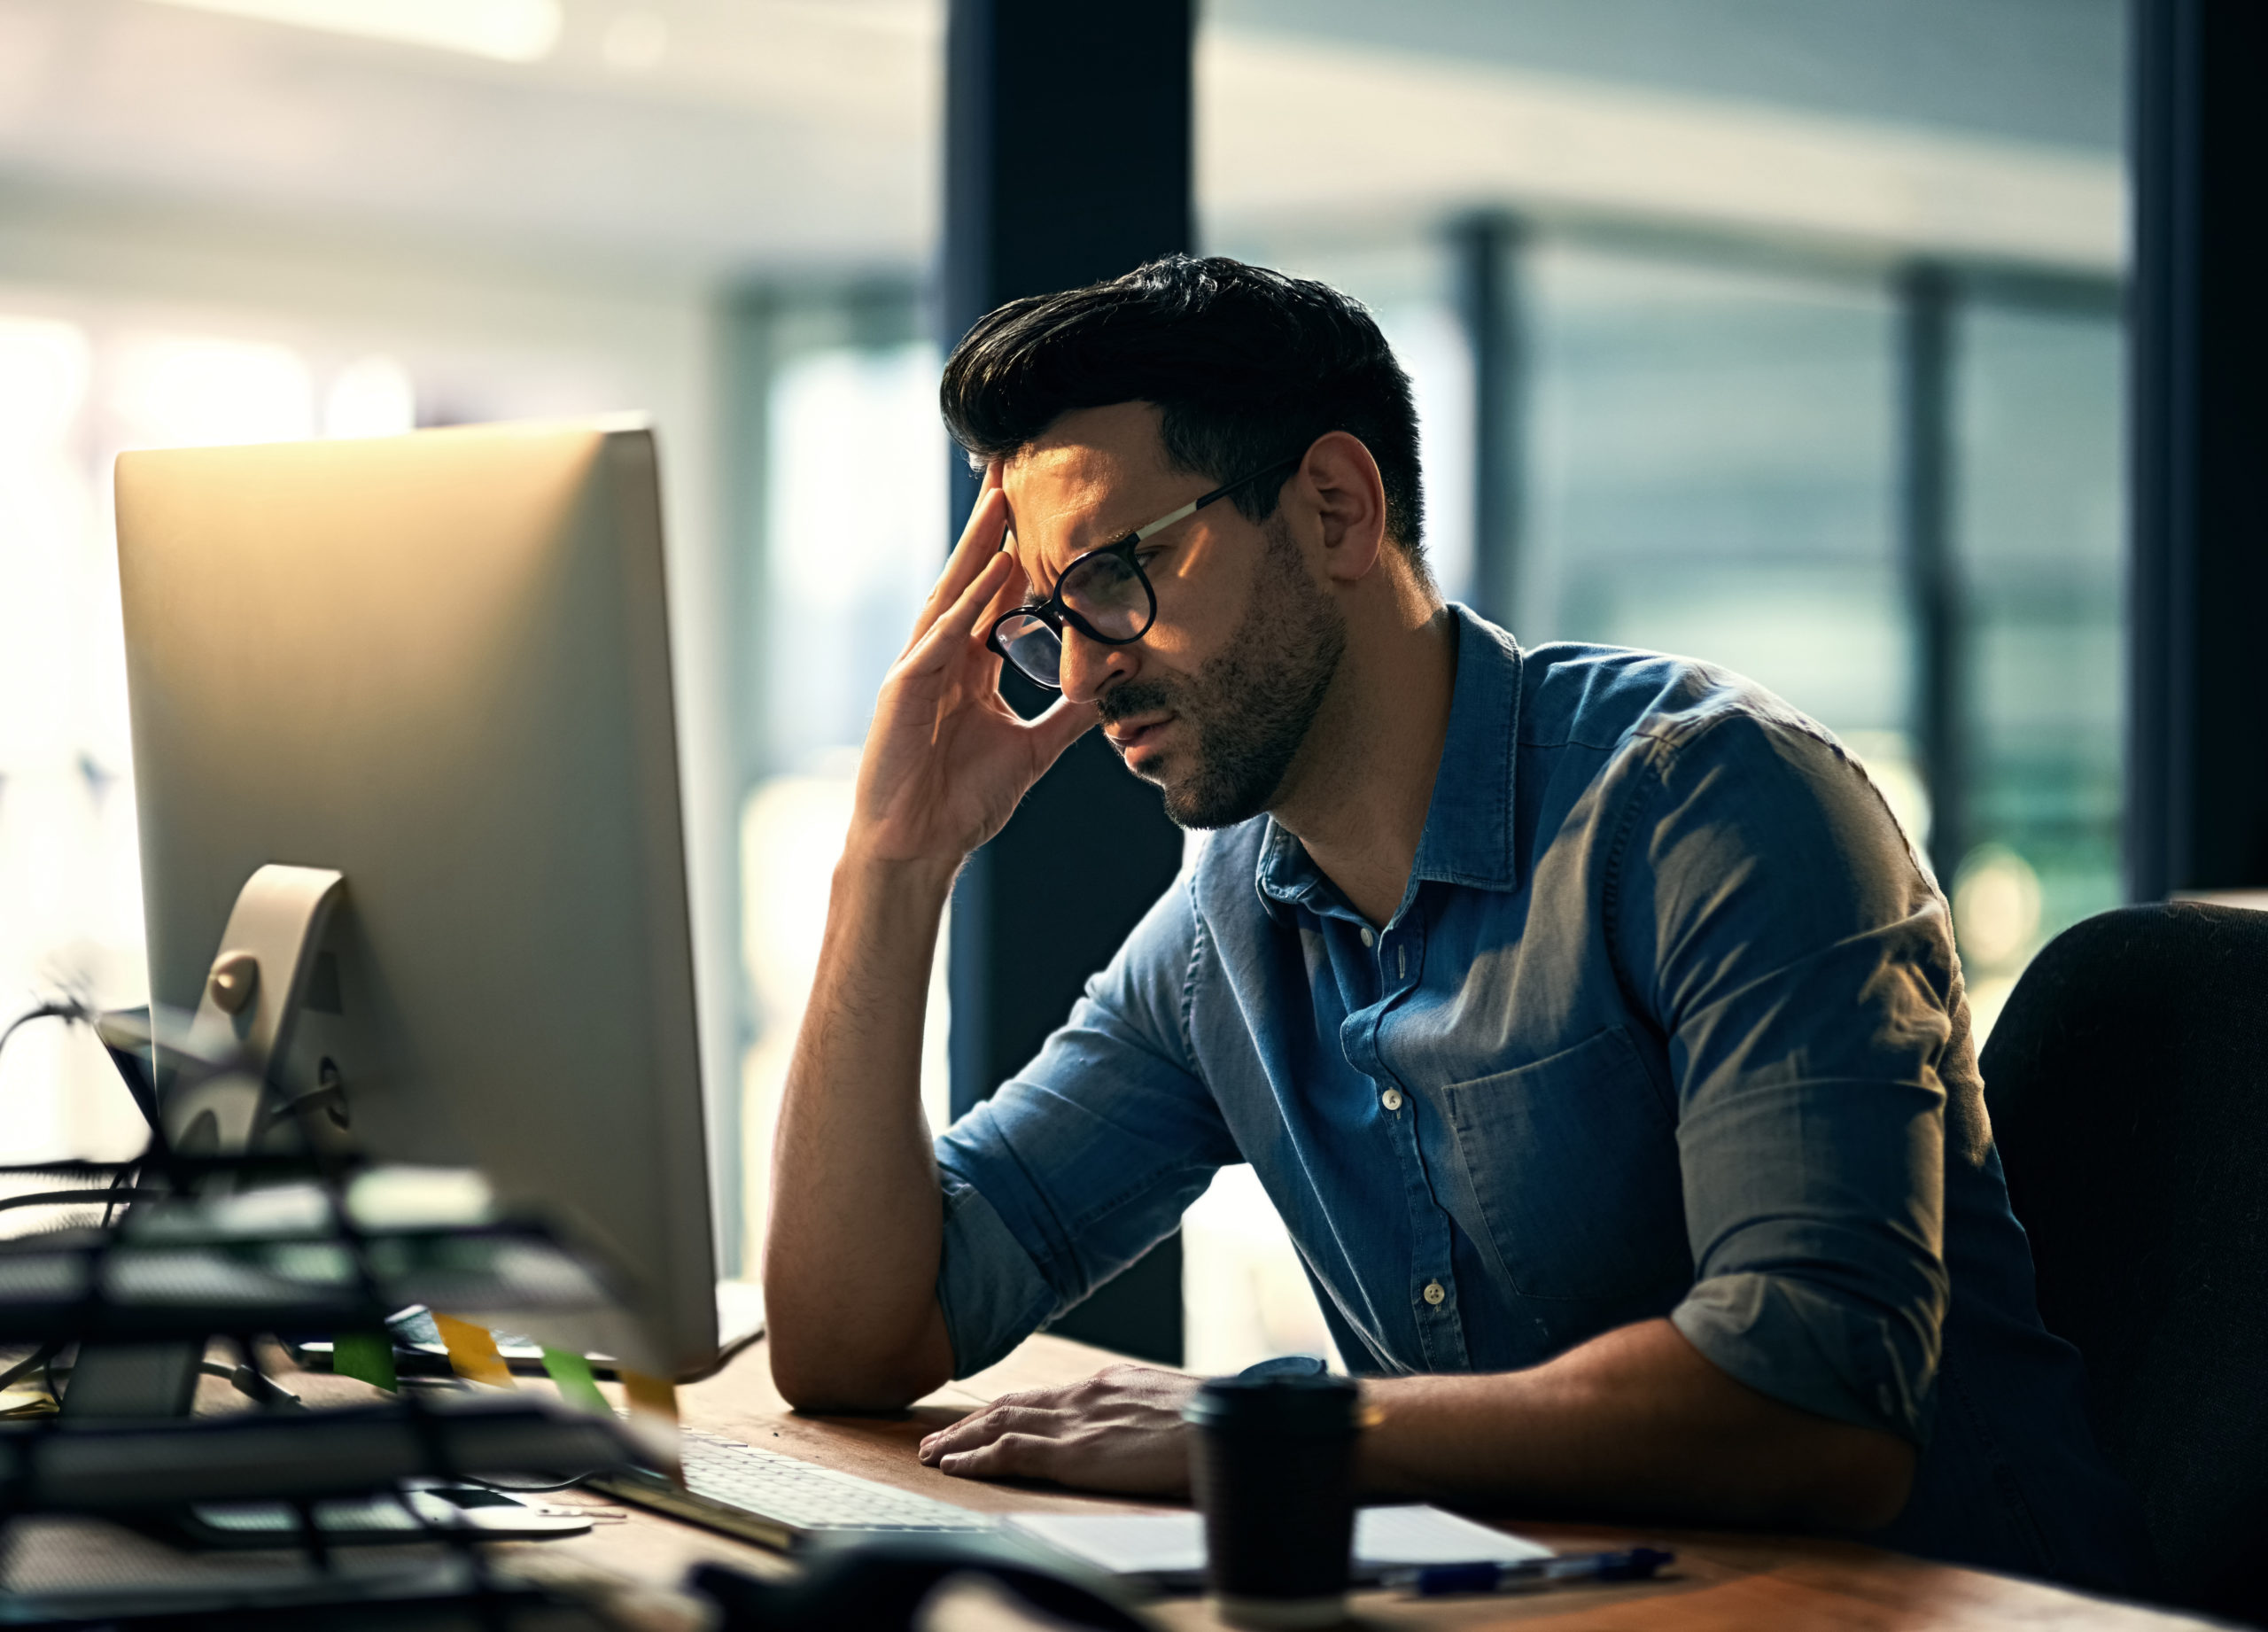 A man is staring at his computer with his hand against his head and an anxious look on his face. Overcoming entrepreneur depression is not easy, but there are ways to manage it.